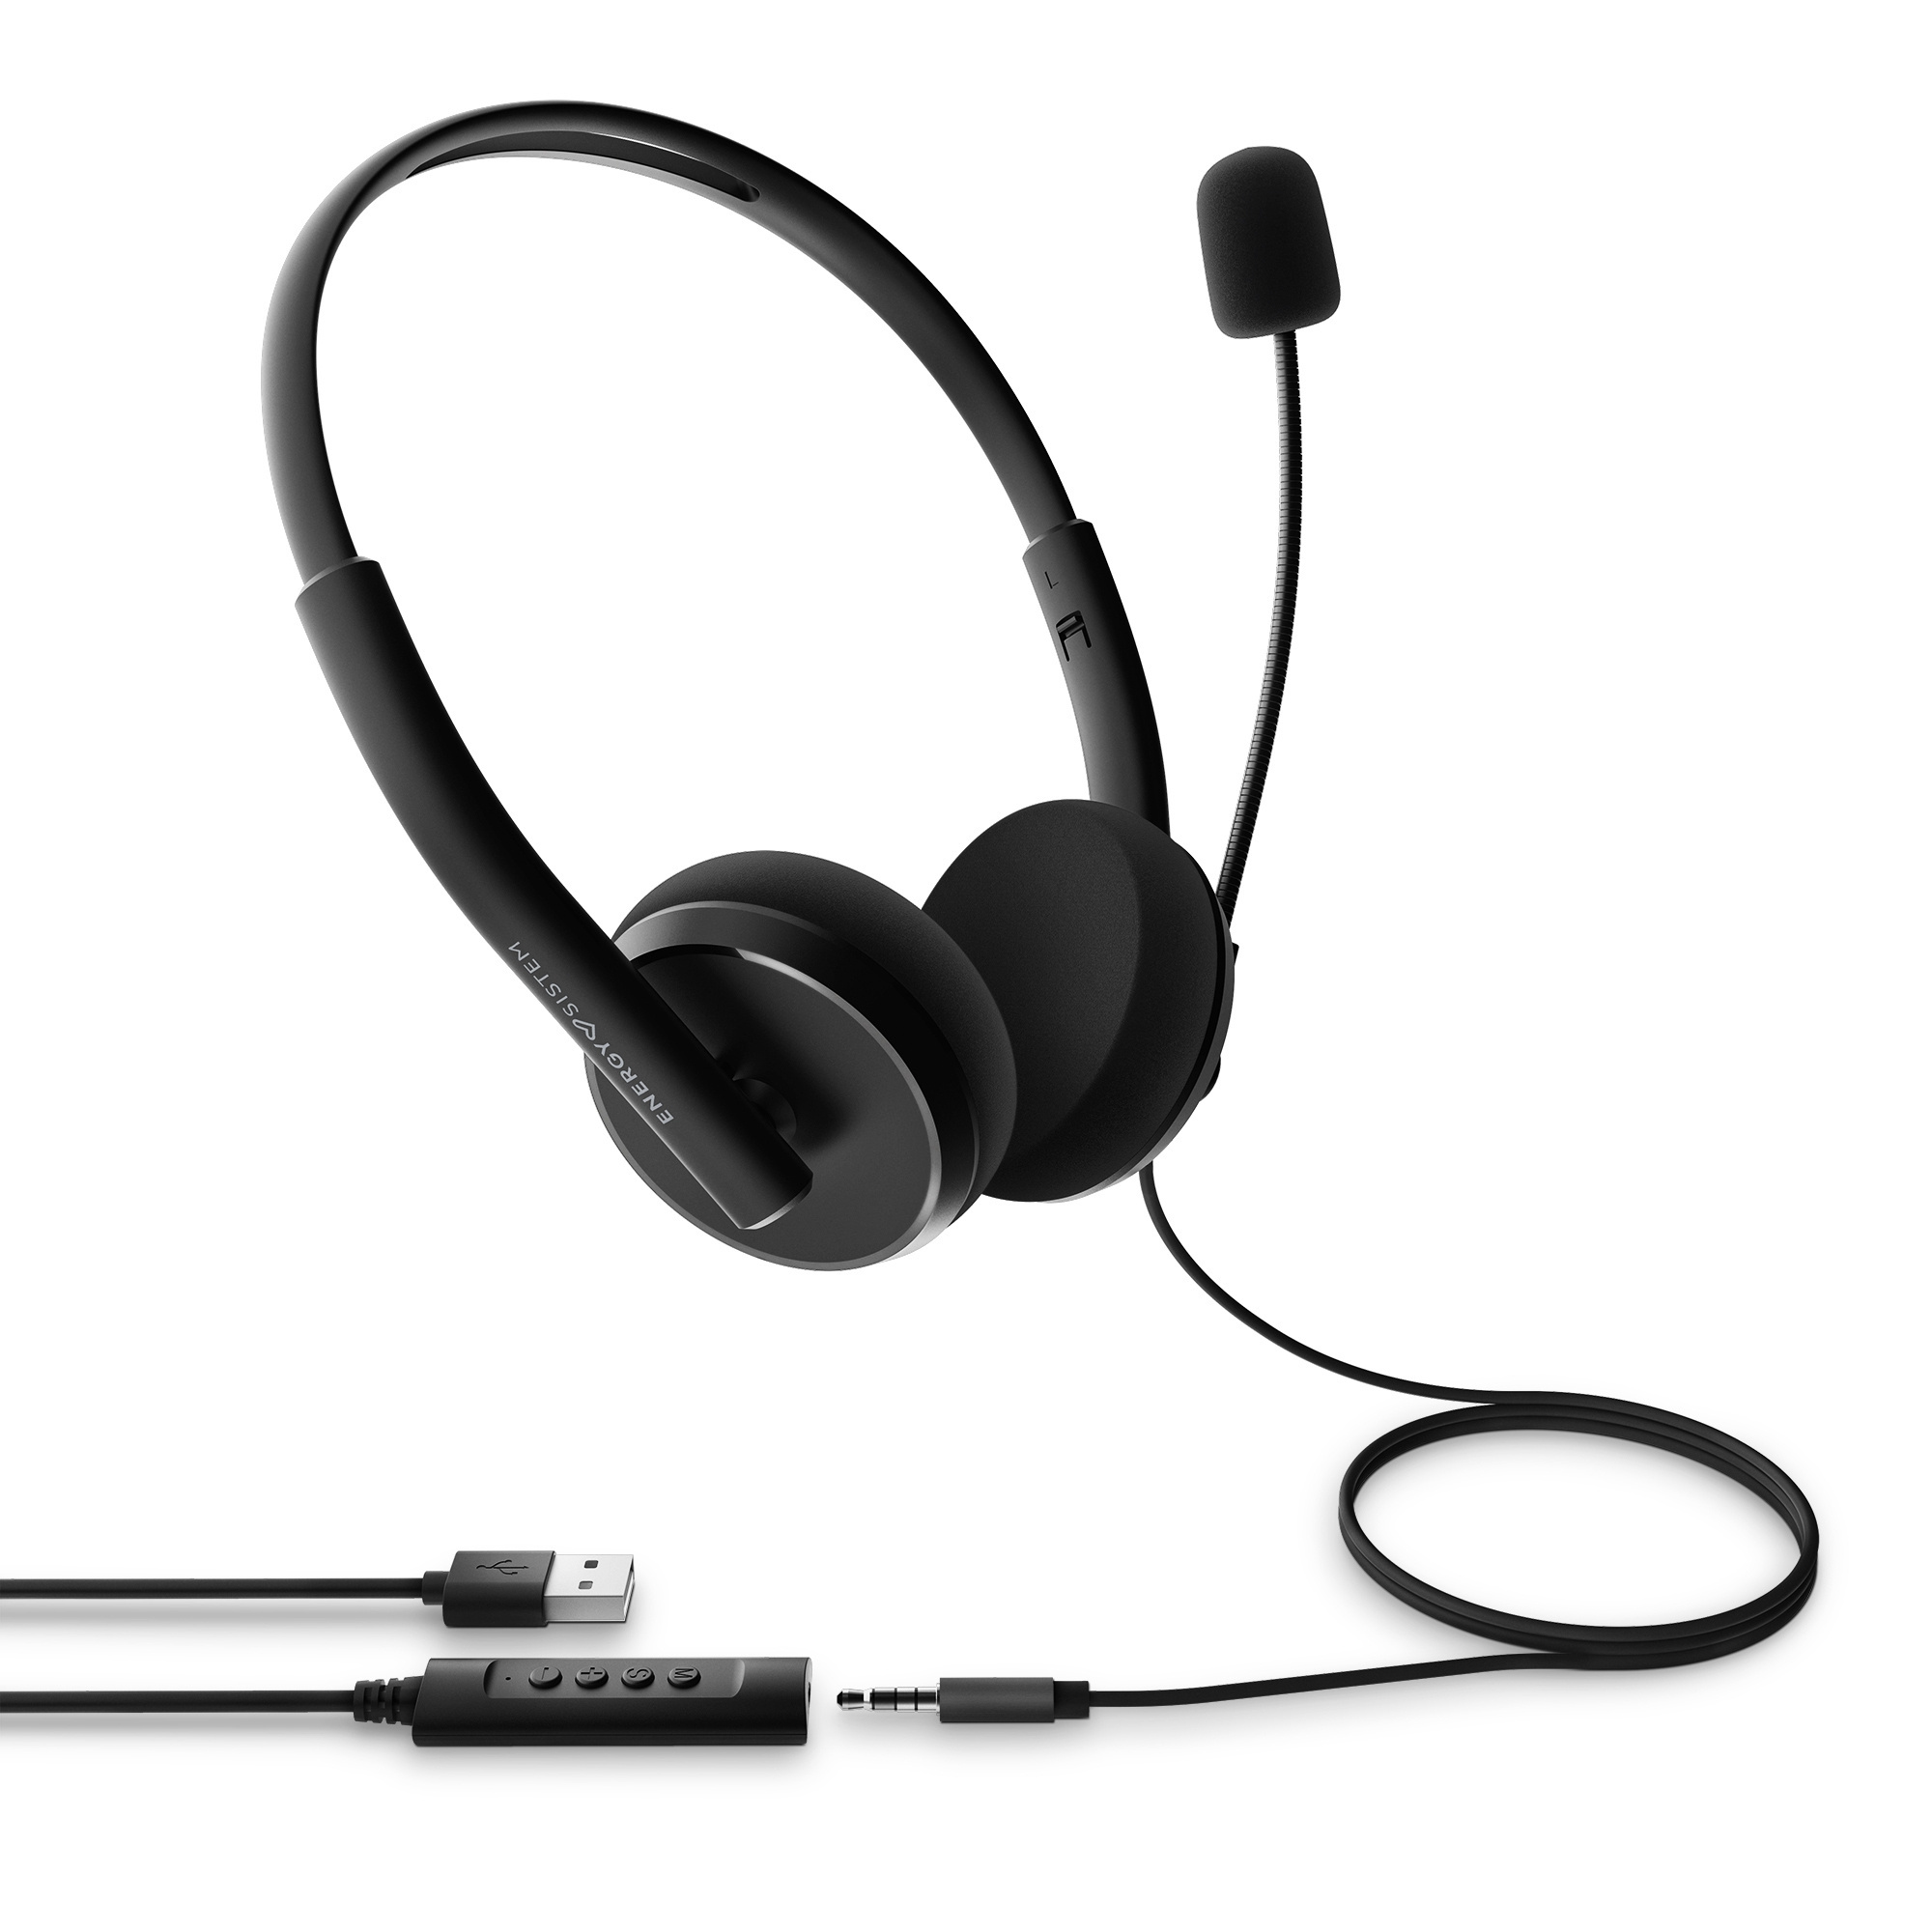 Headset with in-line volume and mute control.